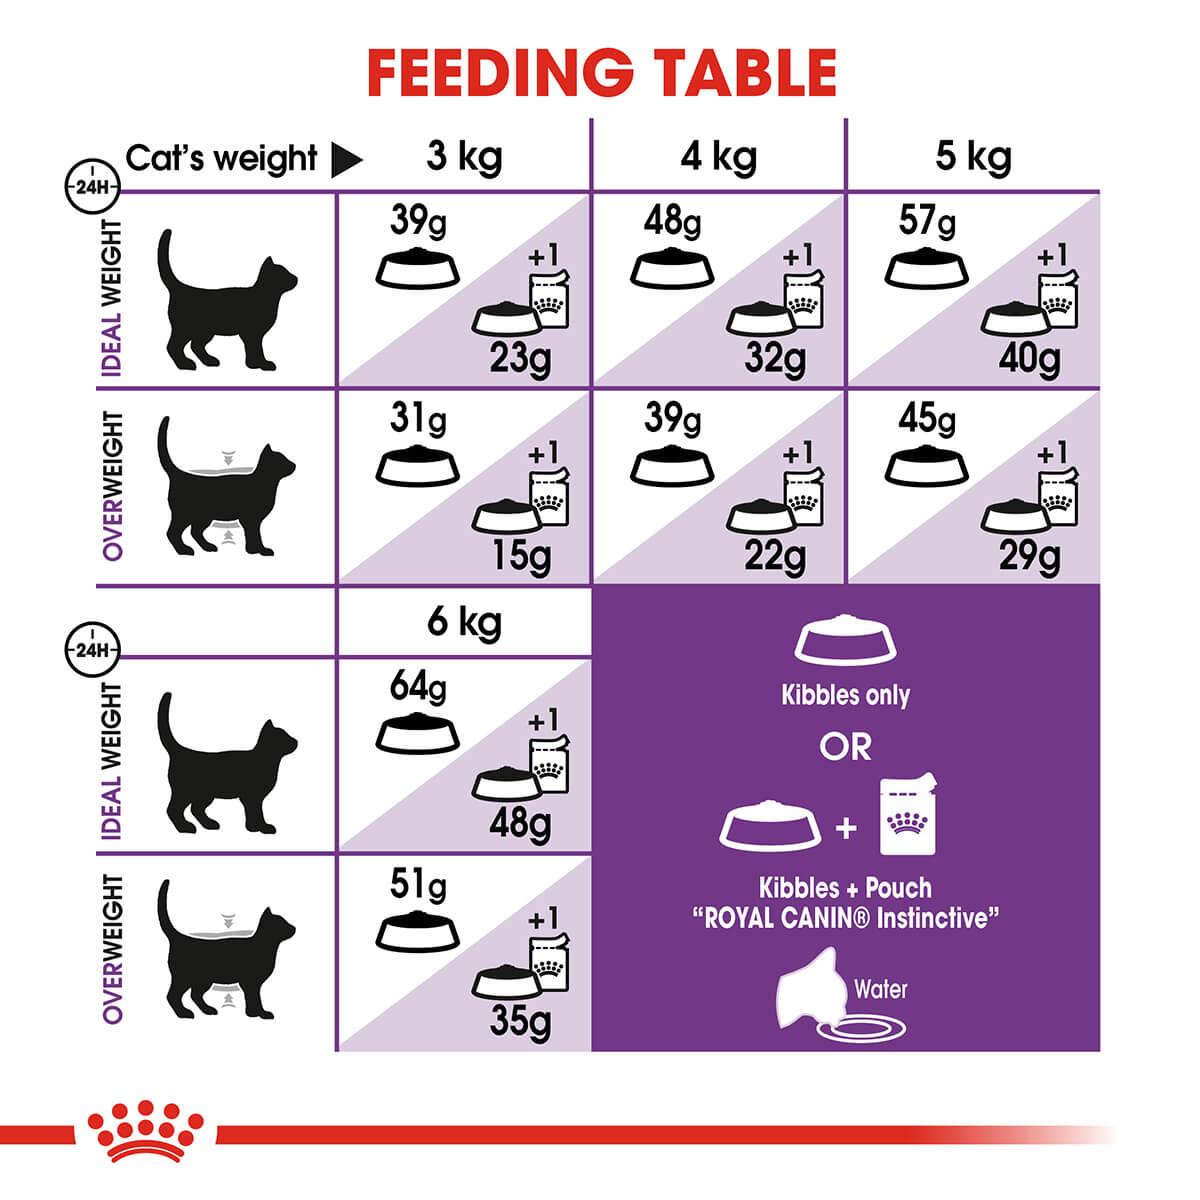 Royal Canin Sensible Digestion Adult Dry Cat Food